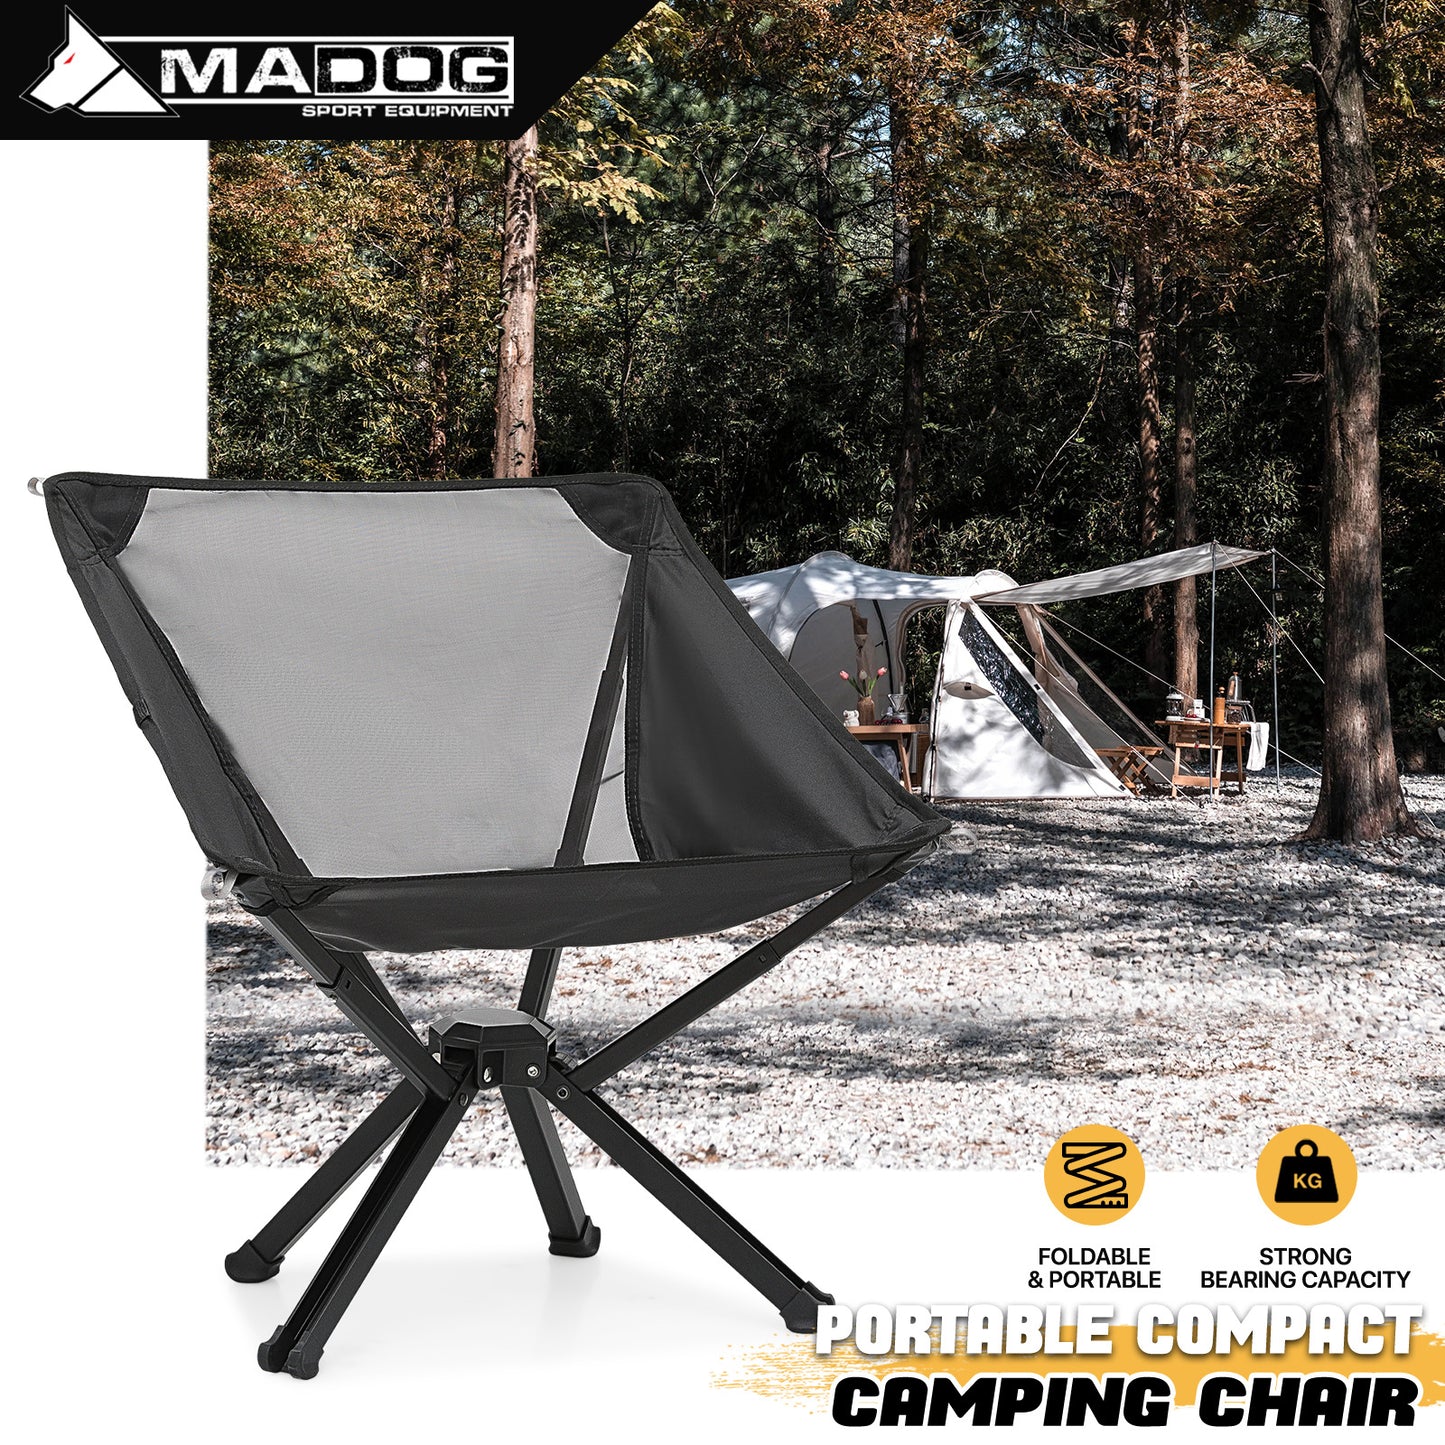 Folding Ultralight Camping Chair - Quick Open - 250lbs Weight Capacity